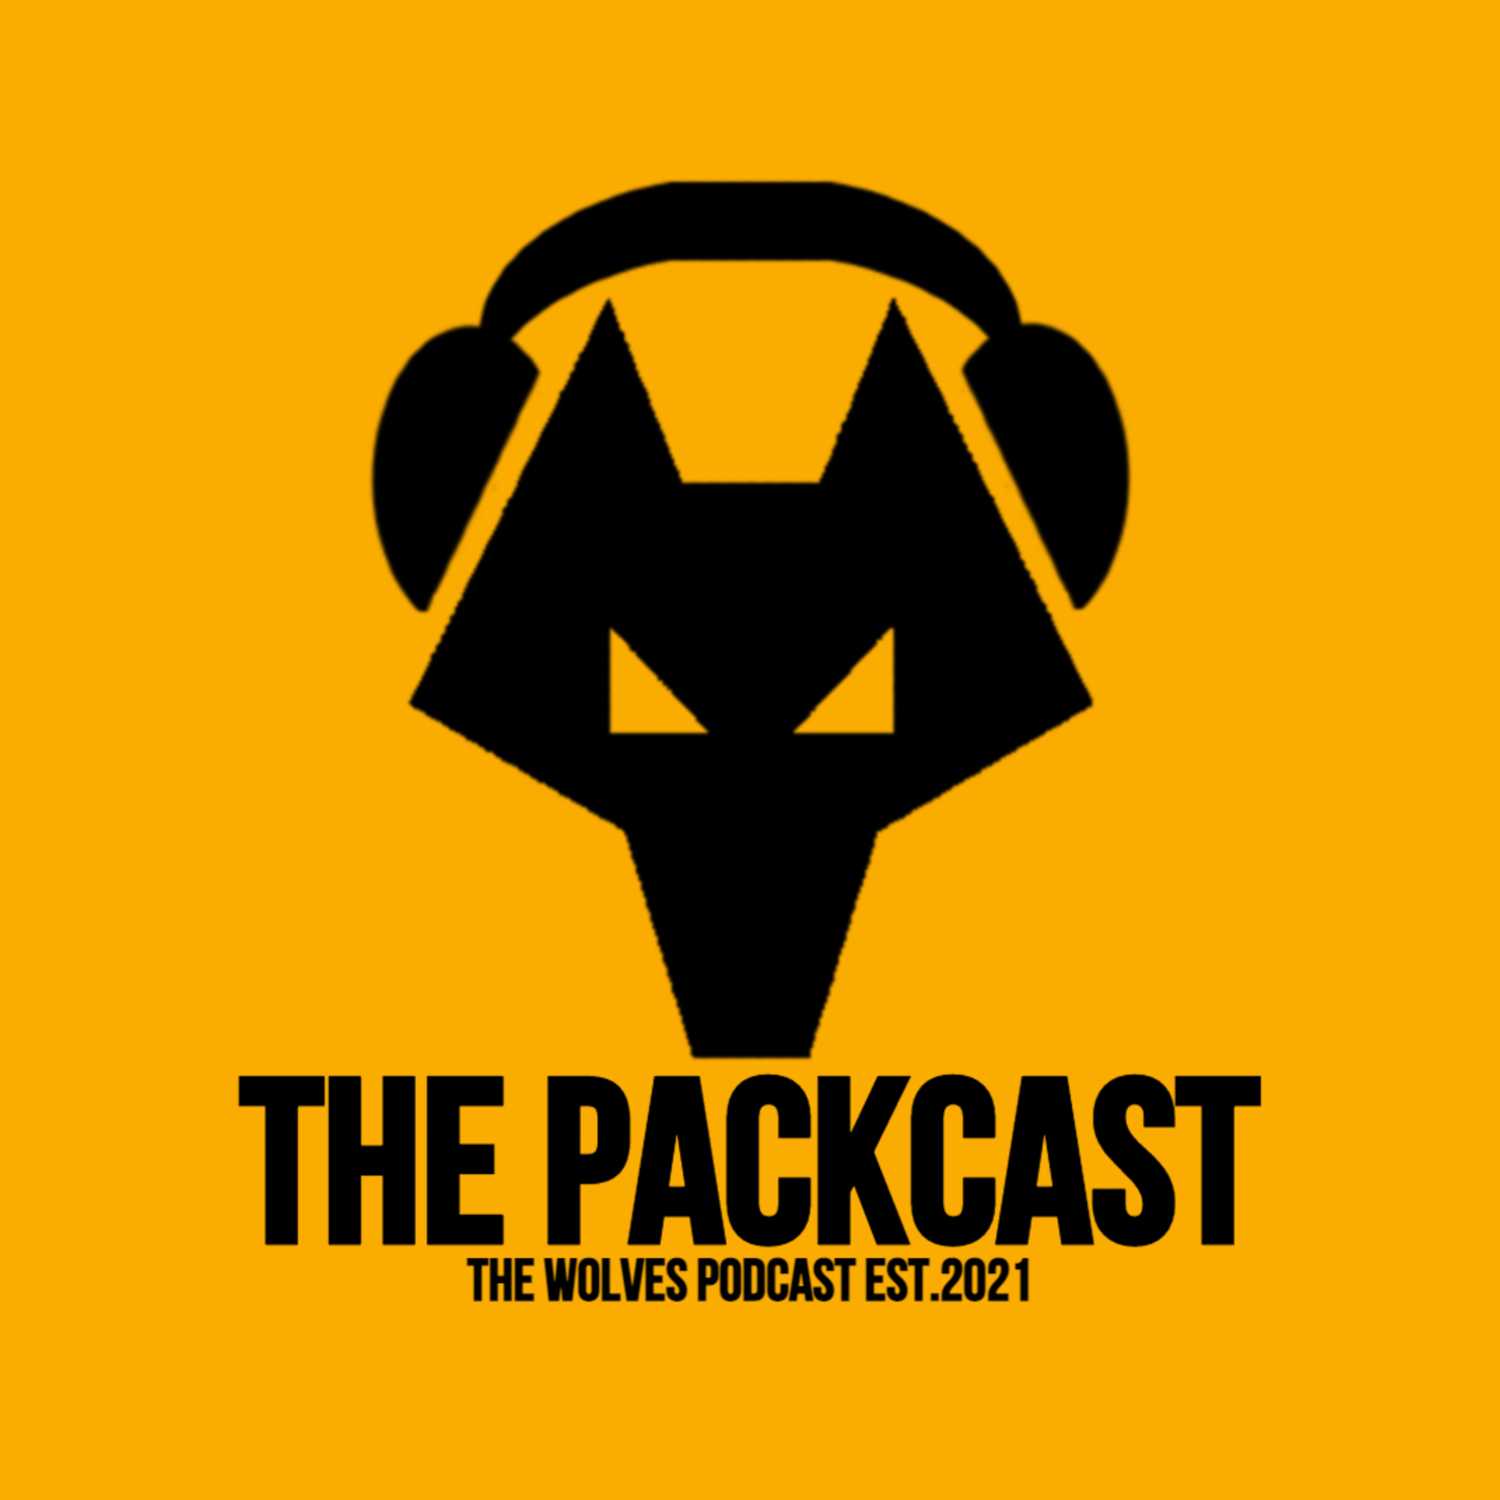 The PackCast